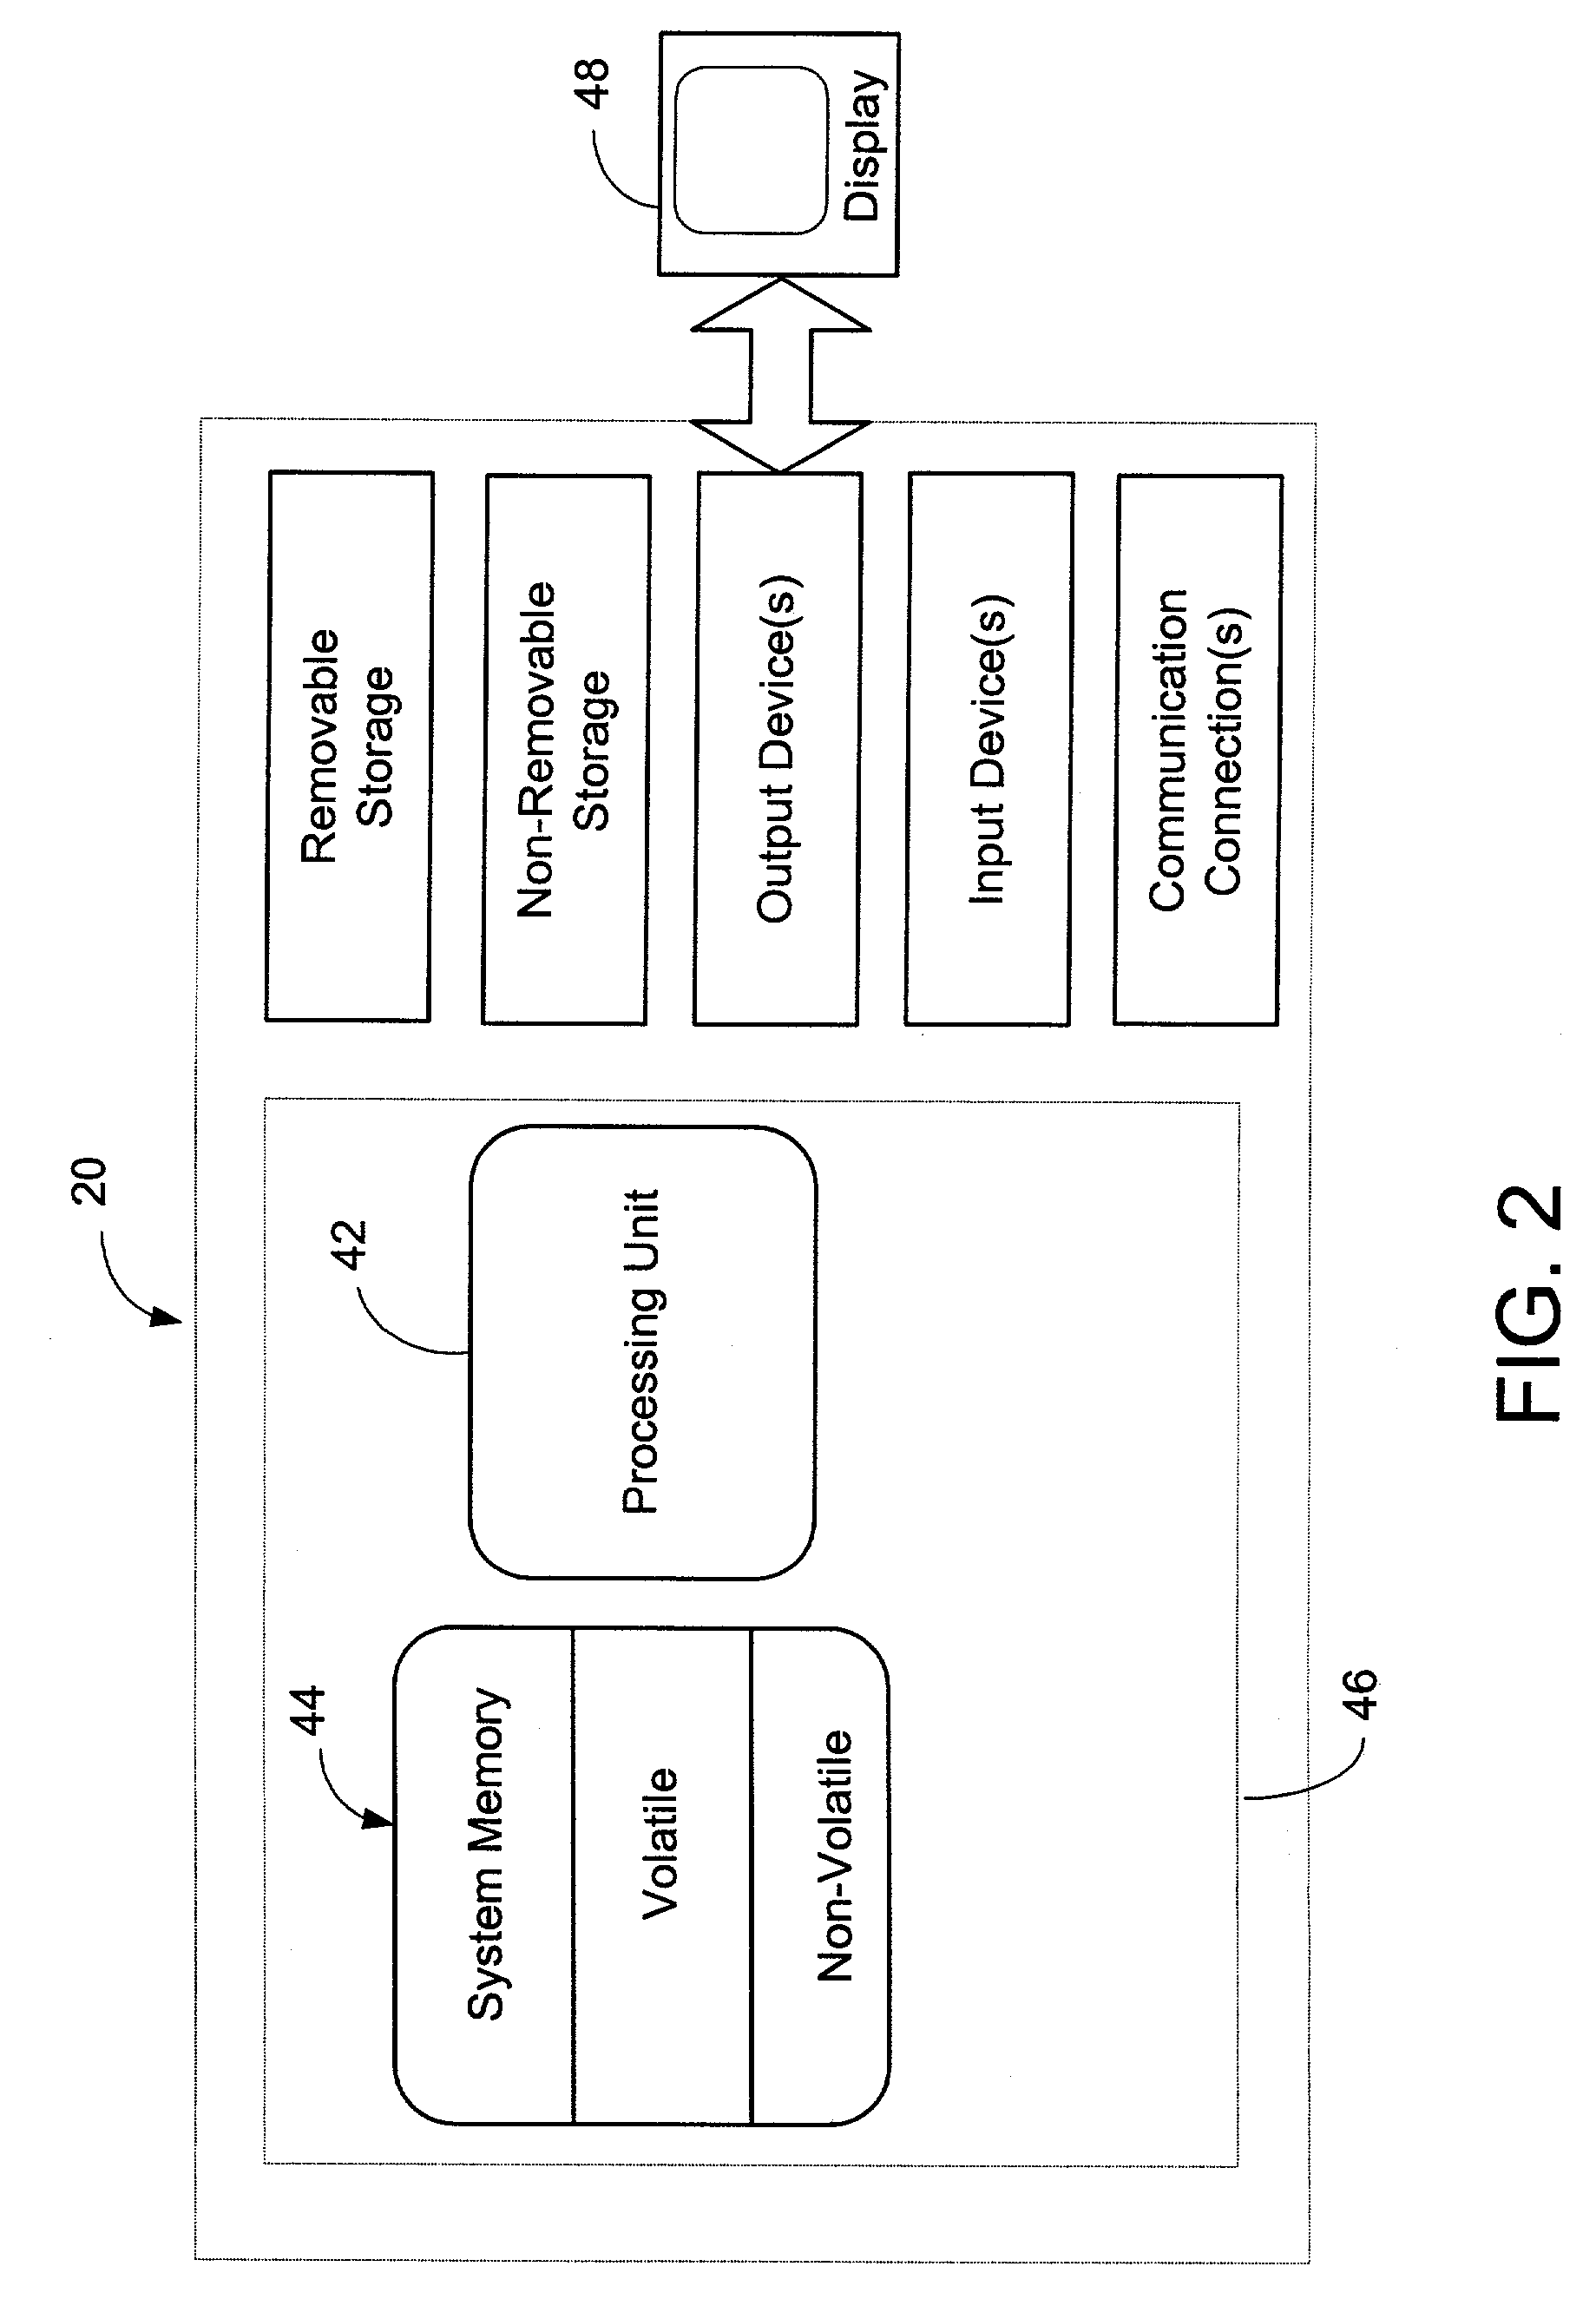 Method and System for providing adaptive bandwidth control for real-time communication